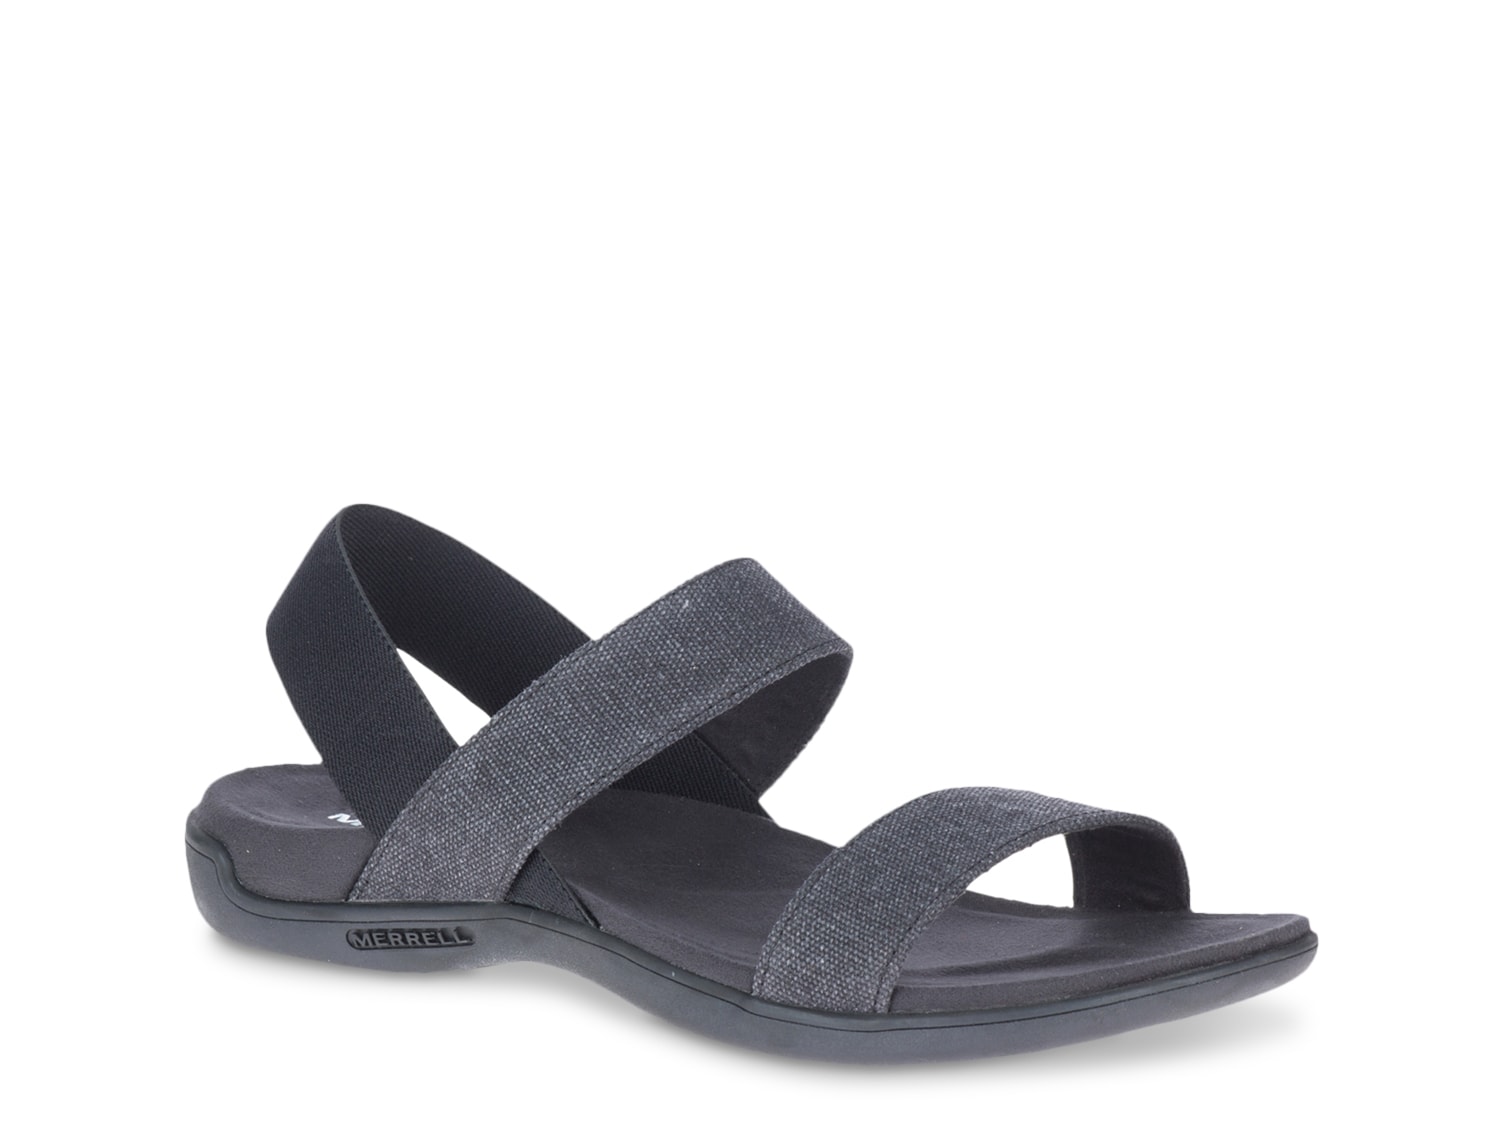 District Finlay Sandal - Shipping | DSW